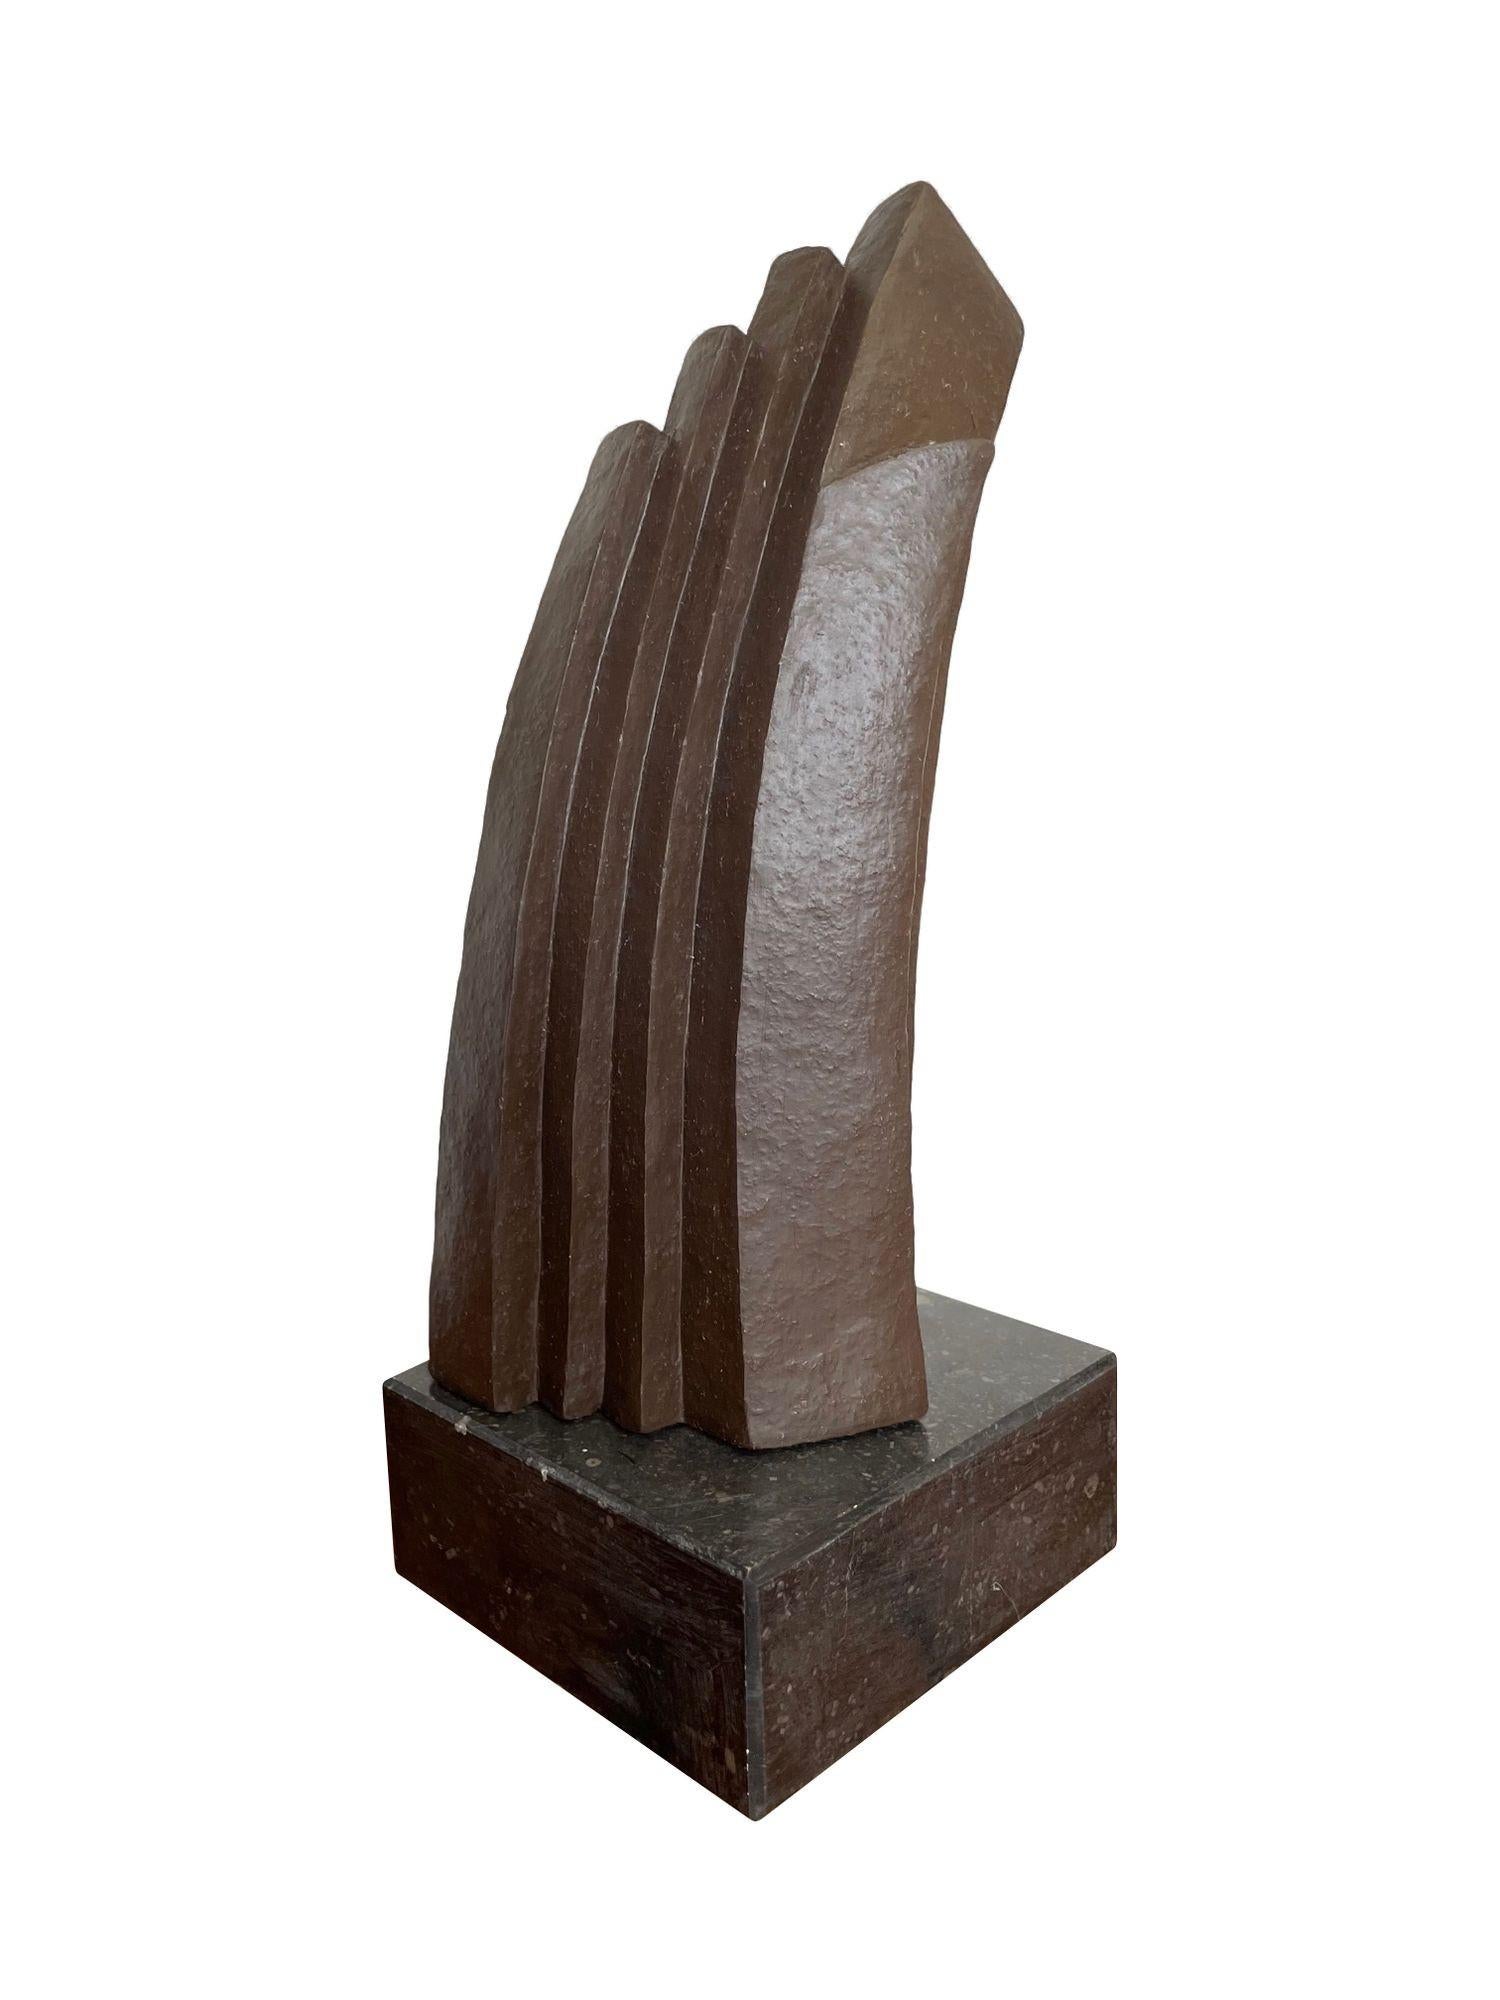 Ceramic A 1960s Belgian ceramic abstract sculpture with bronze textured finish. For Sale